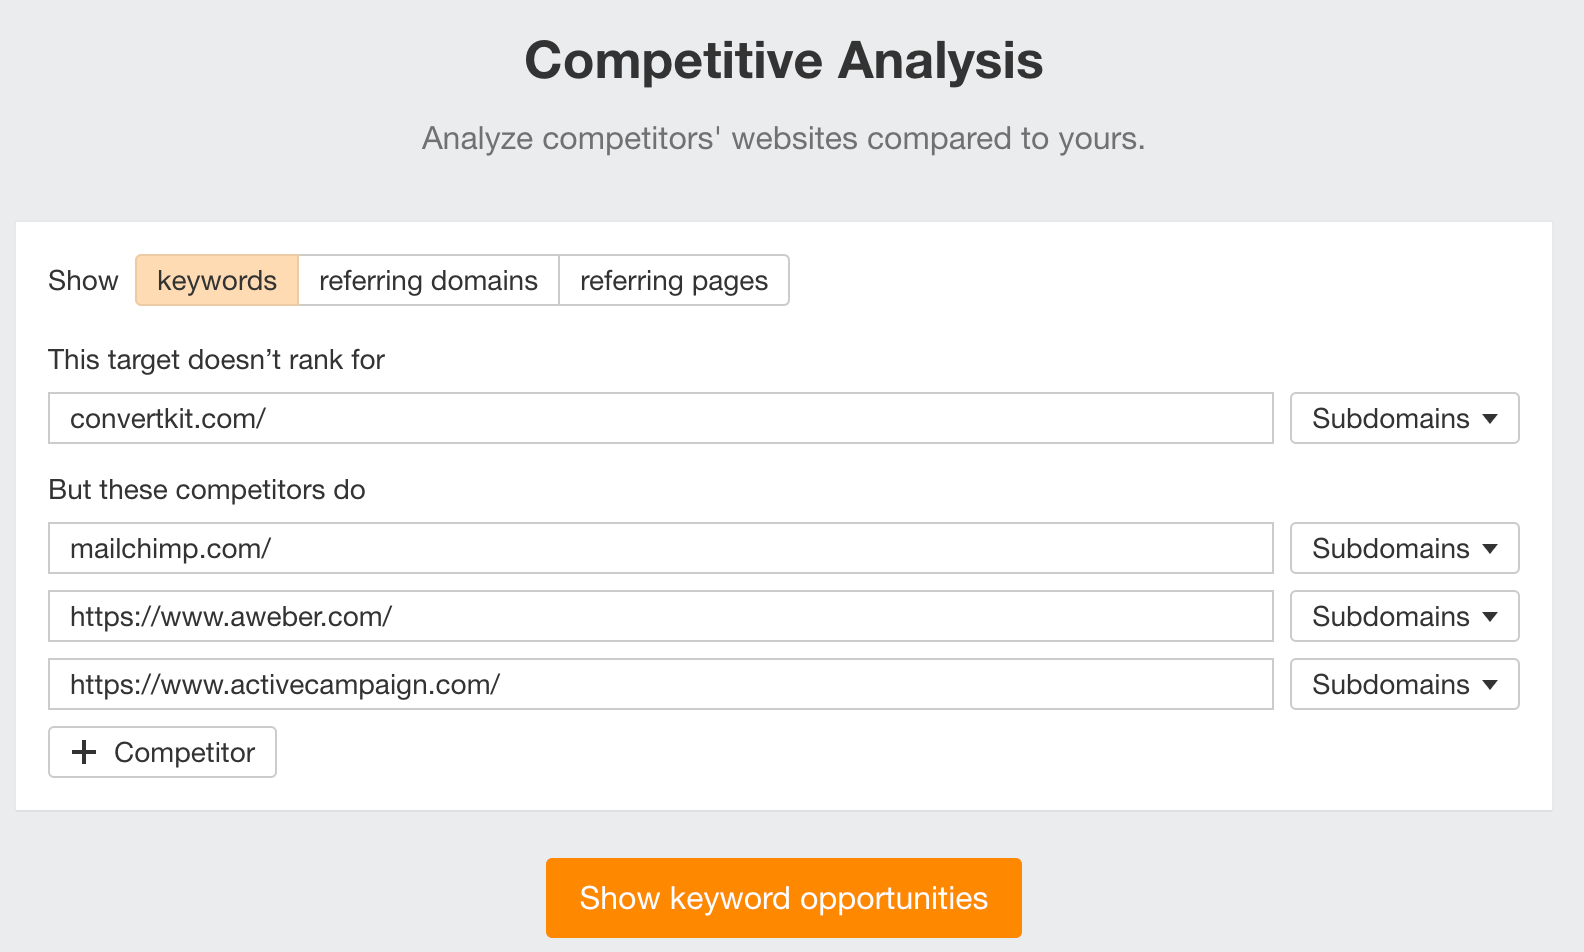 Competitive analysis report with multiple competitors